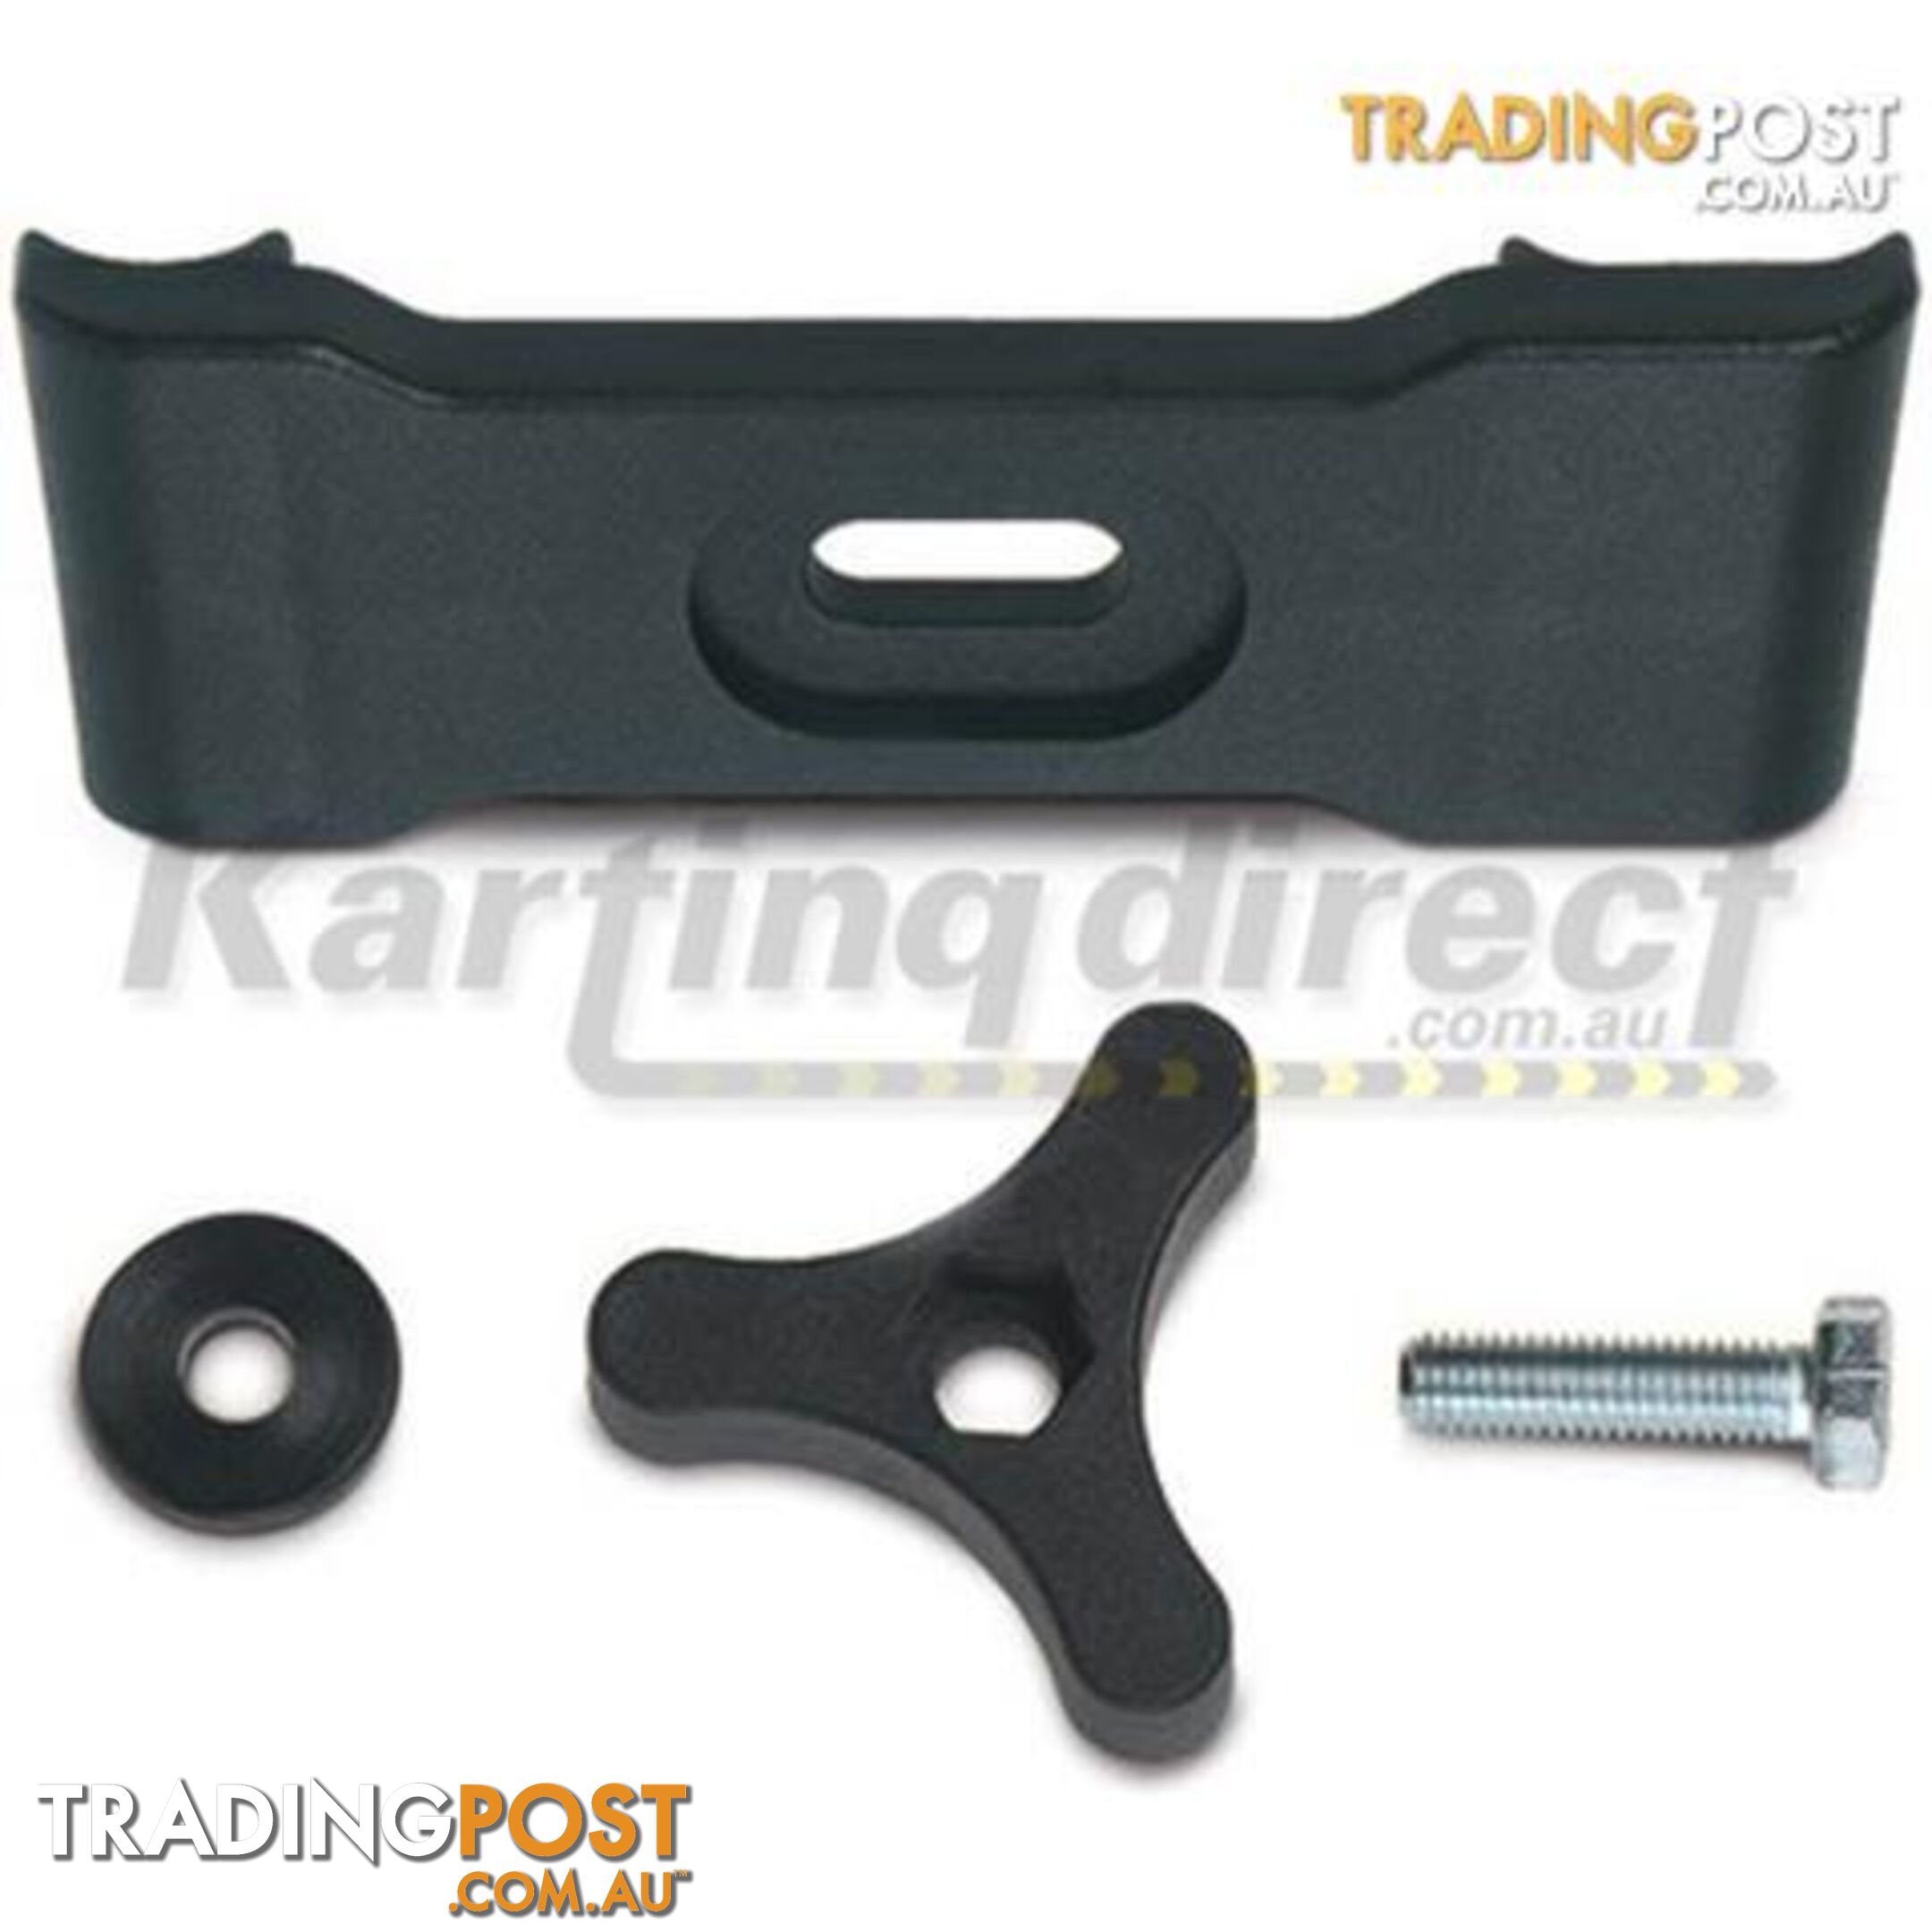 Go Kart Fuel Tank Fitting Kit complete with mount bolt - ALL BRAND NEW !!!